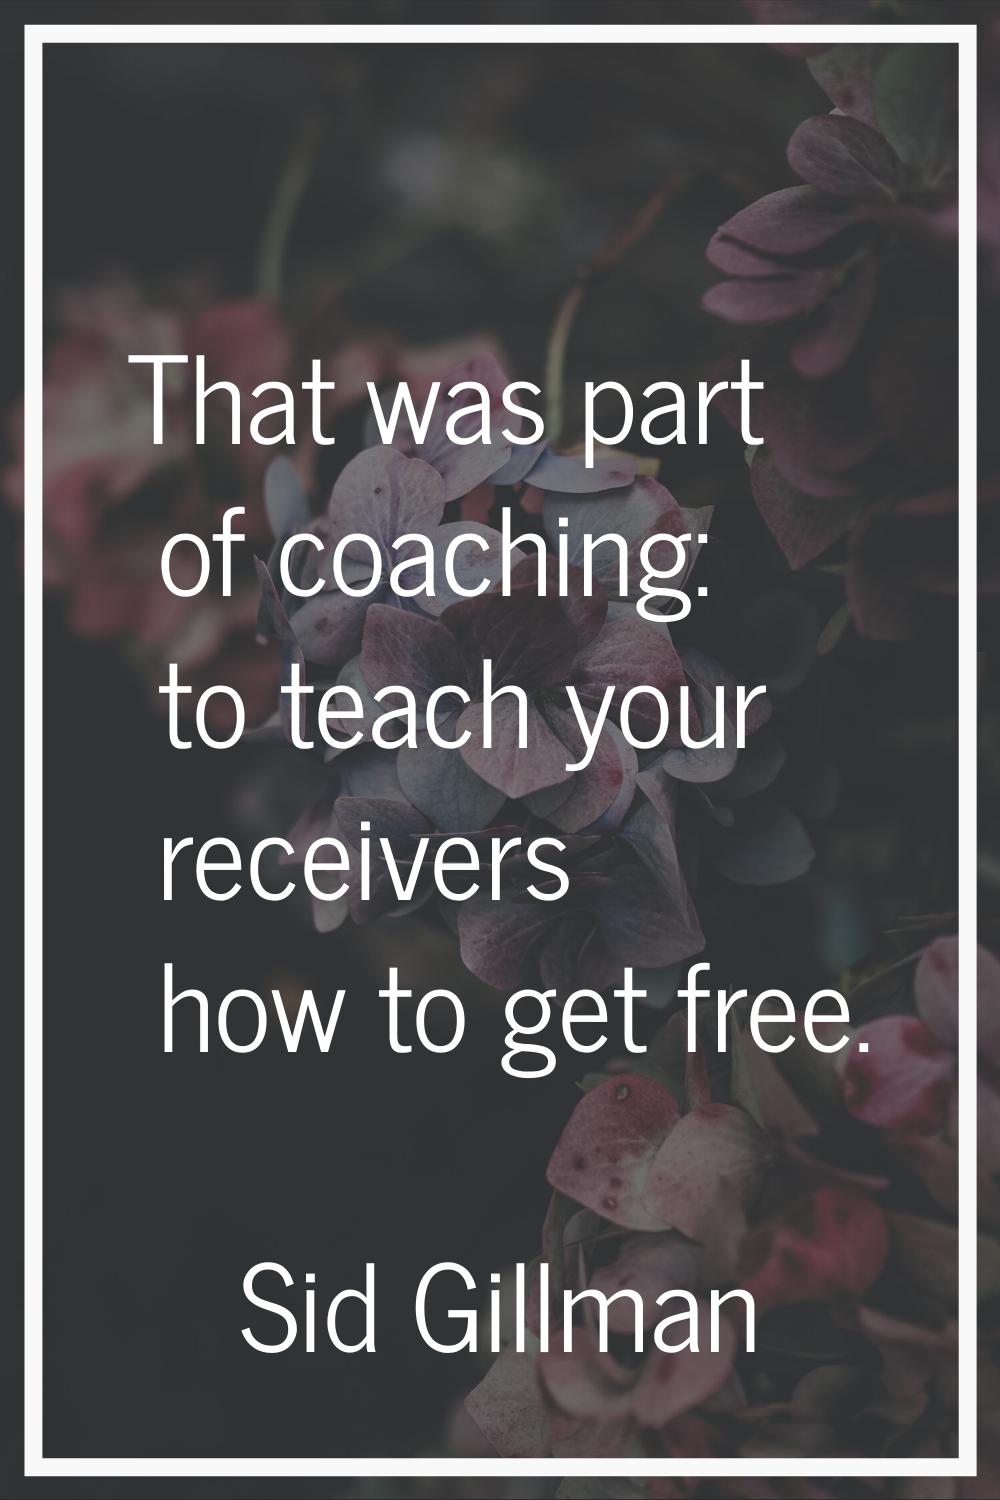 That was part of coaching: to teach your receivers how to get free.